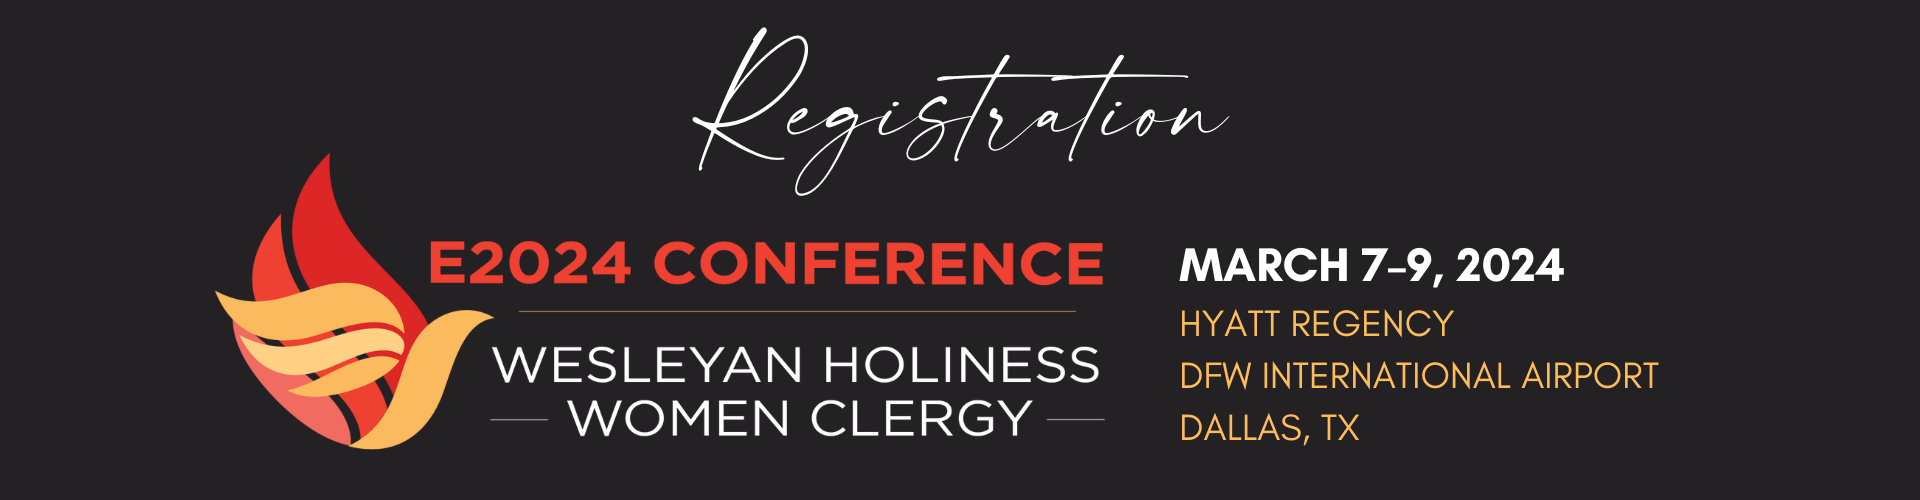 E2024 Wesleyan Holiness Women Clergy Conference